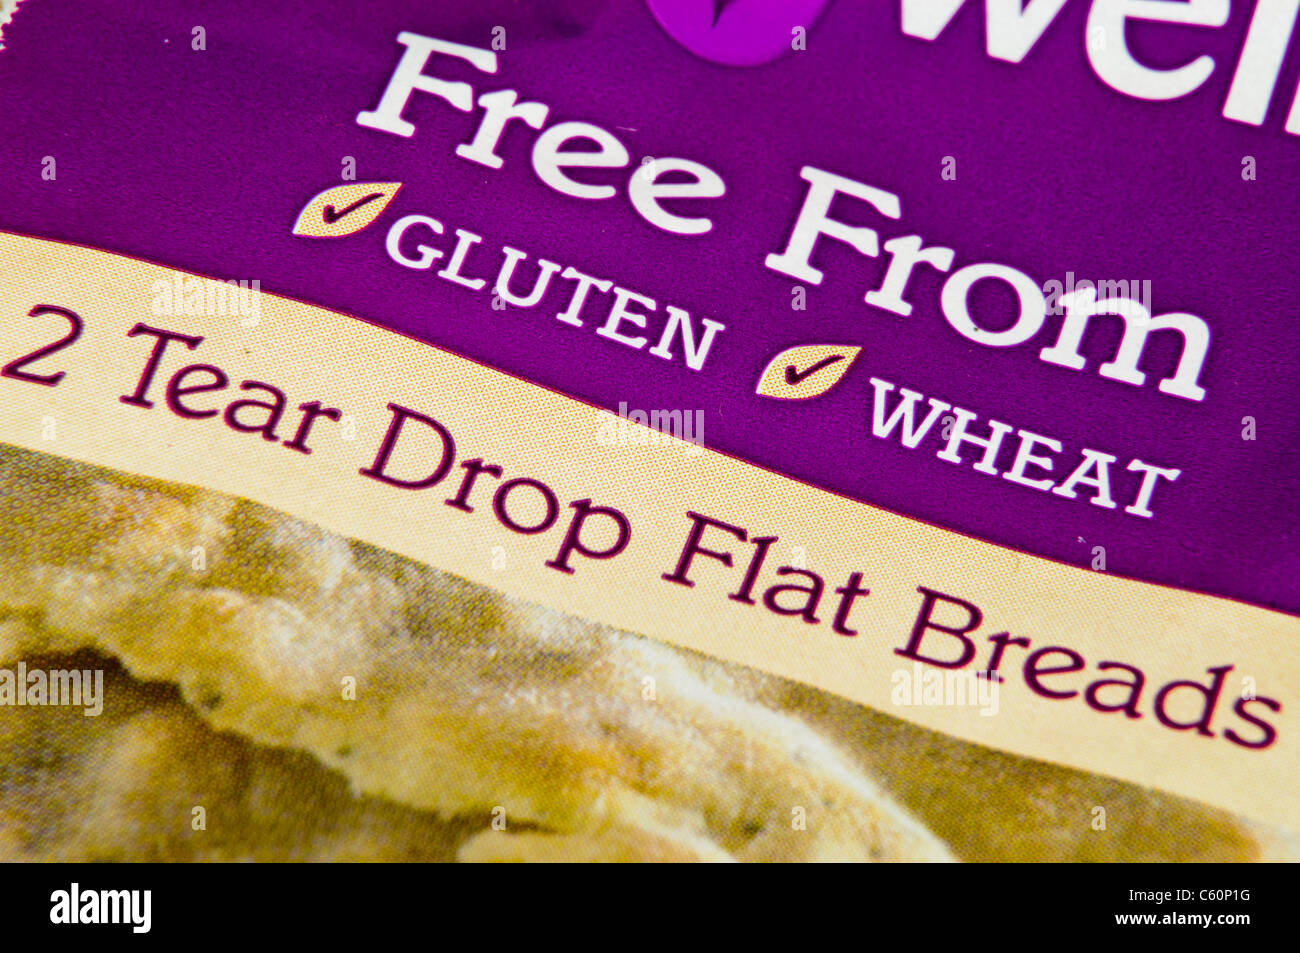 Food packet for gluten and wheat free flat breads (pitta) Stock Photo